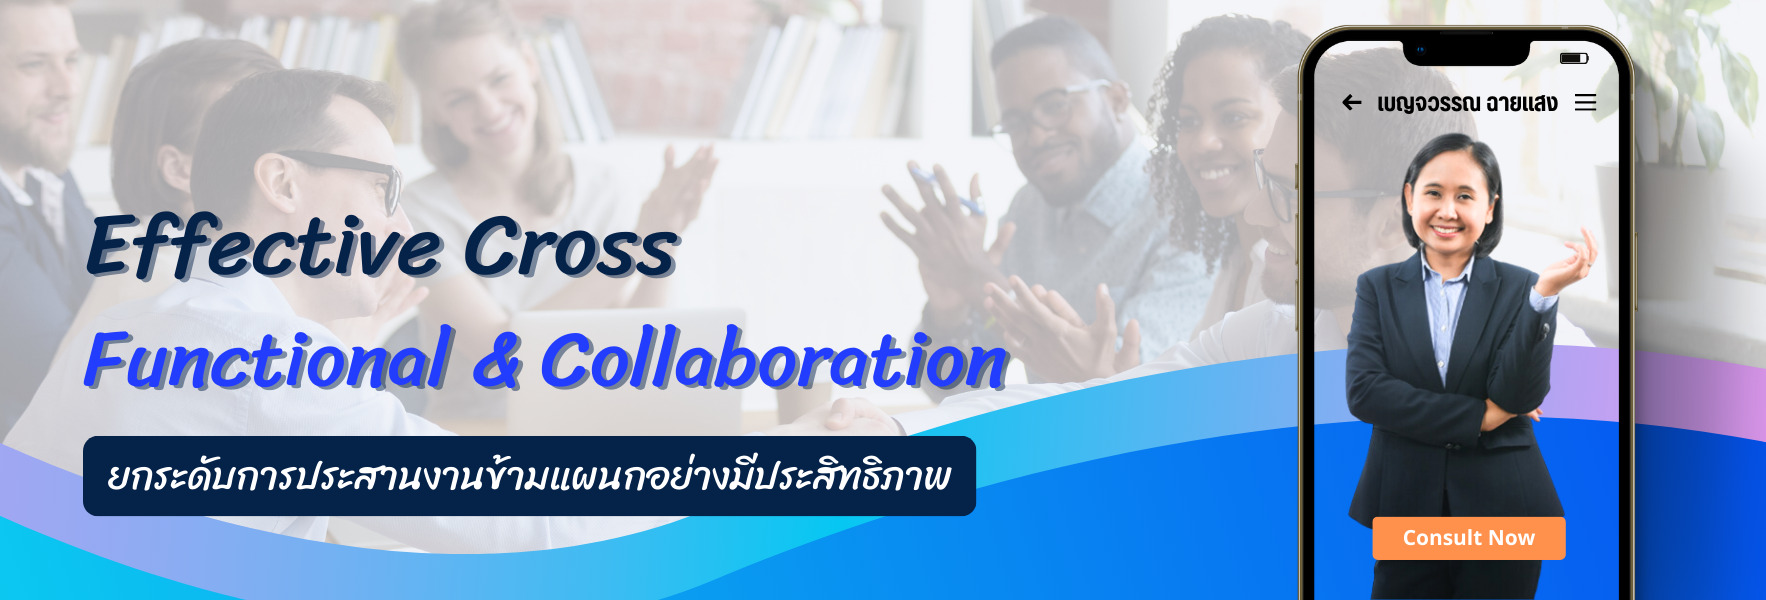 Effective Cross functional & Collaboration